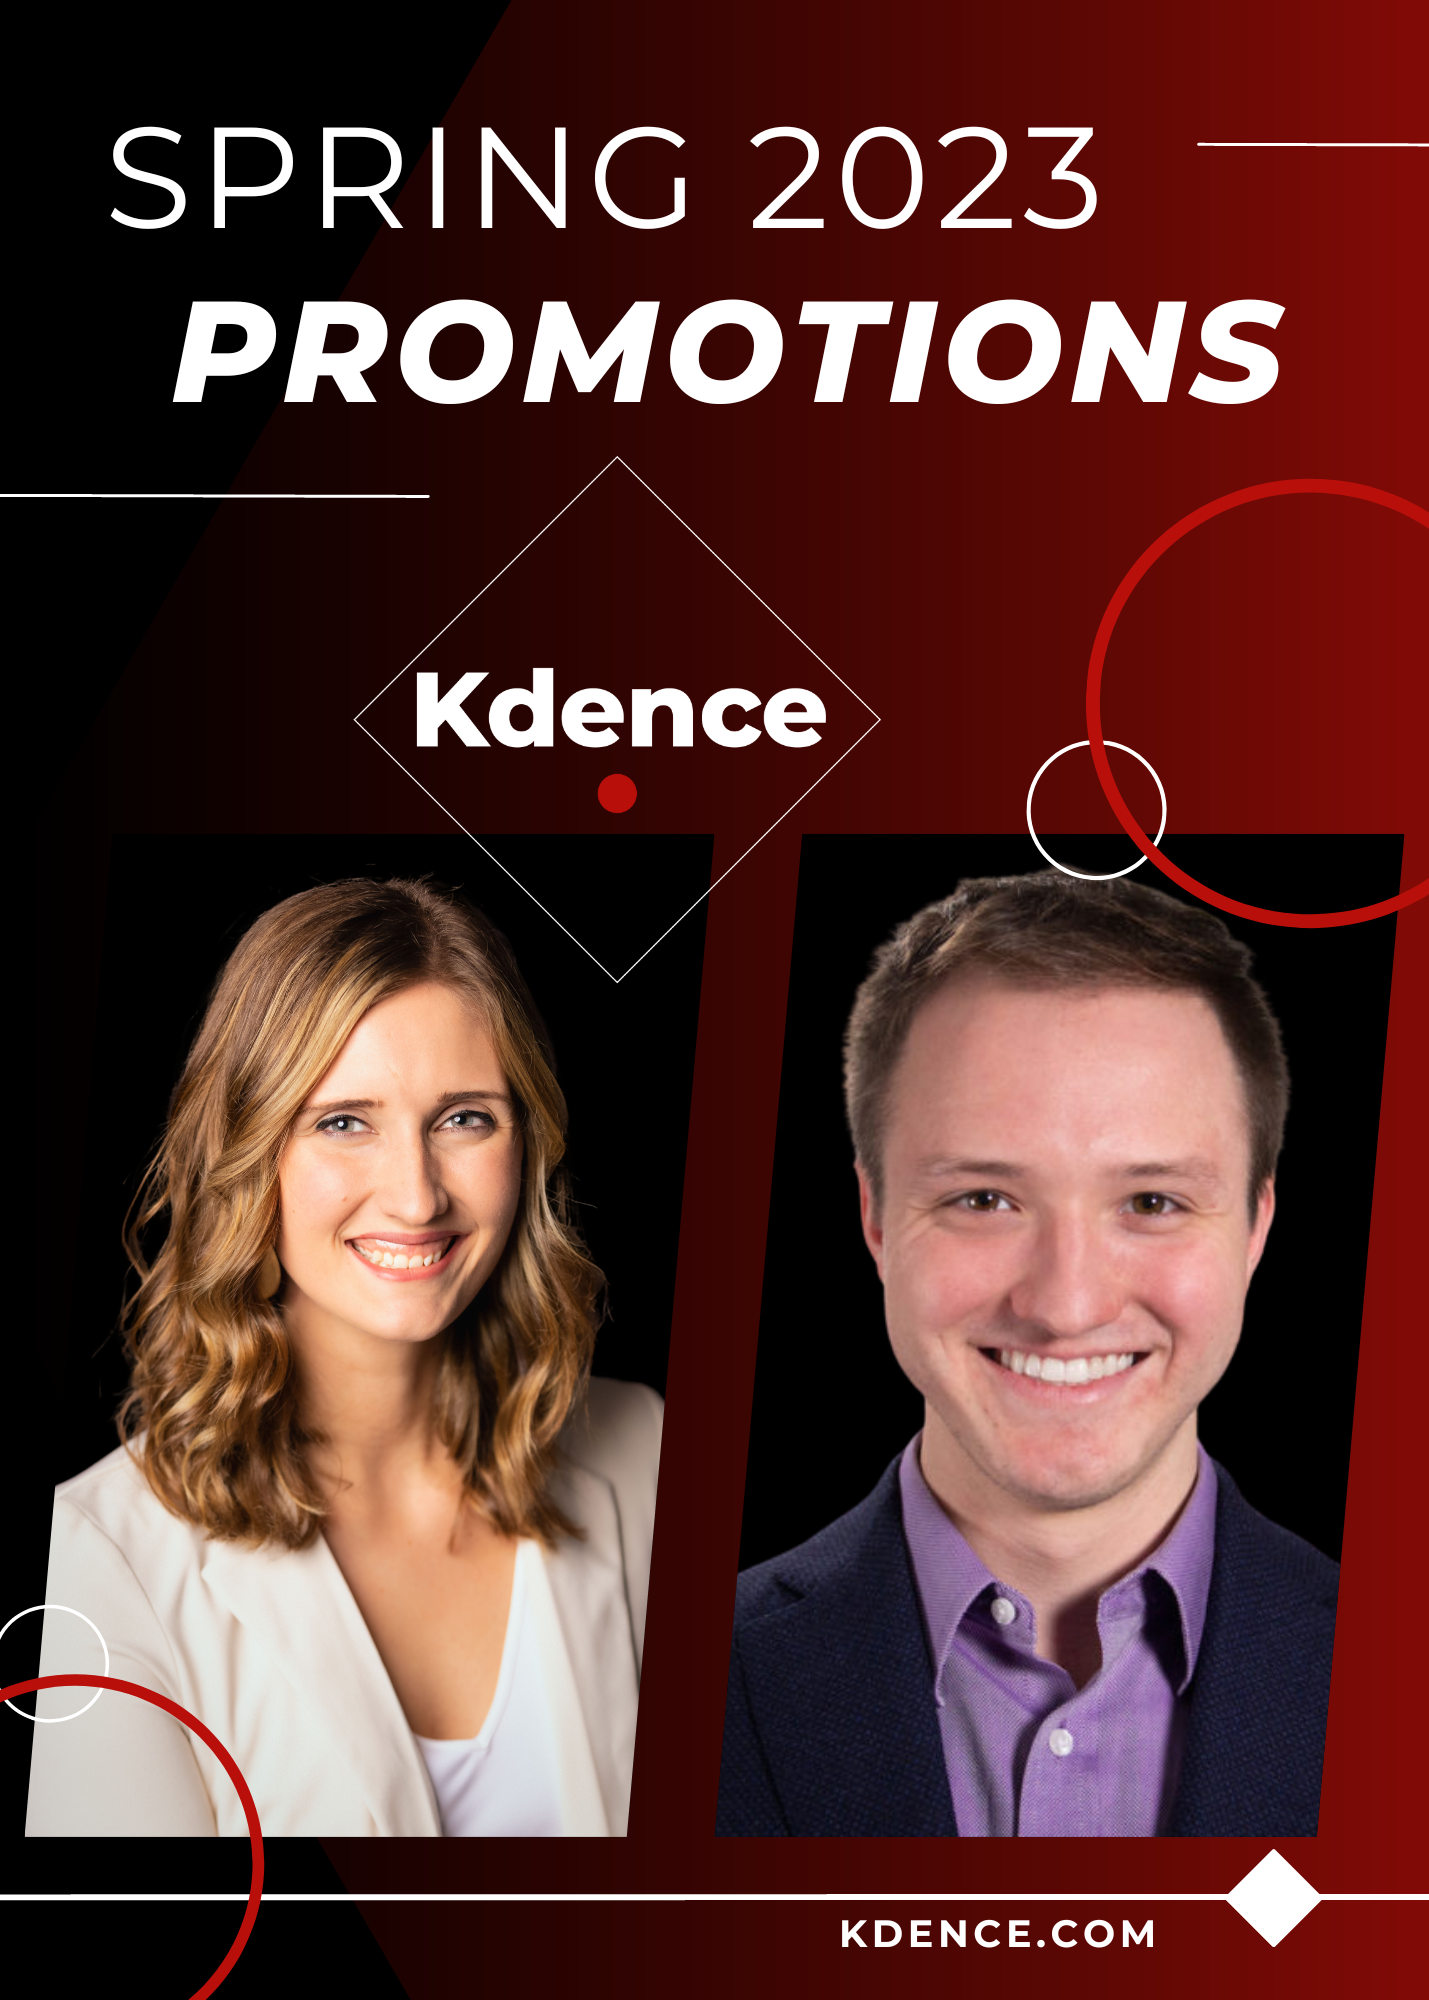 Kdence welcomes Spring 2023 promotions